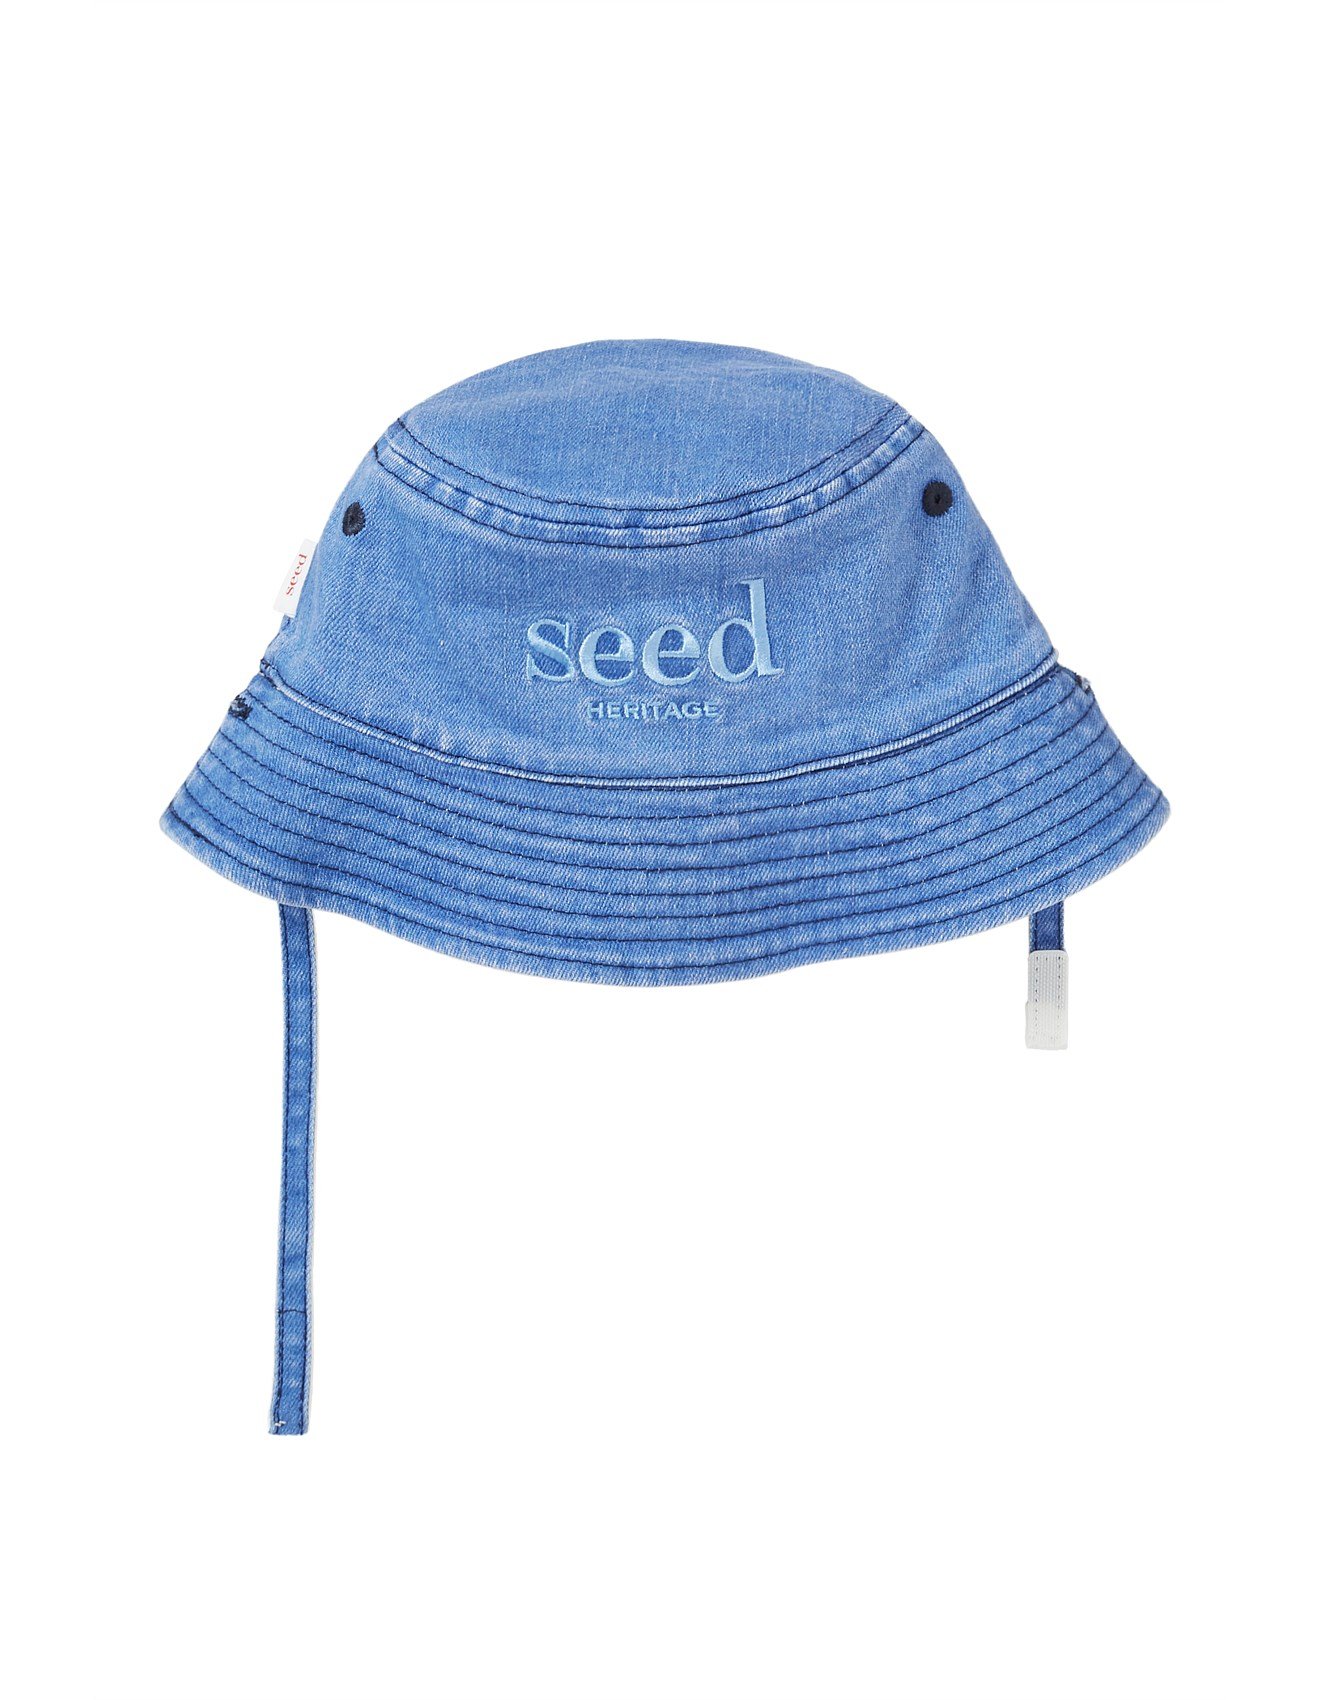 Seed Heritage Heritage Bucket Hat in Chambray.jpg